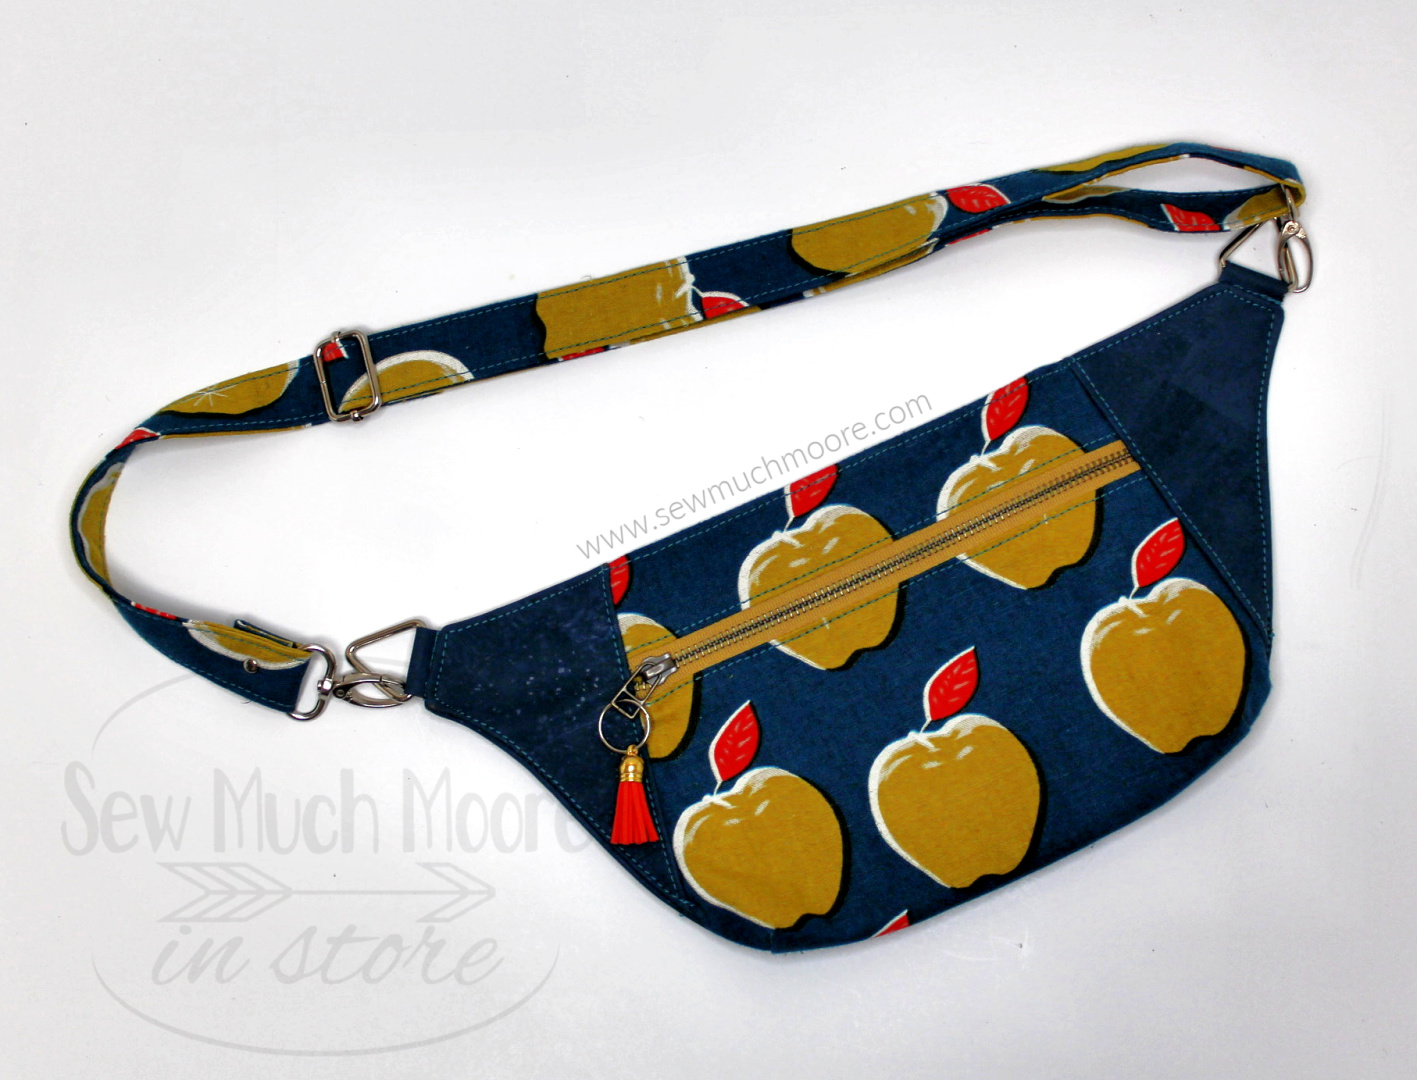 Fanny Packs are the perfect bag for travel and for hands free! The Dayna Pack is a great Fanny Pack pattern. Get this fun and simple pattern to make your own Fanny Pack! Watch the video tutorial too! #FannyPack #DaynaPack #HowTo #DIY #VideoTutorial #StepByStep #VideoInstructions #BagMaker #SewMuchMoore #SewMuchMooreInStore